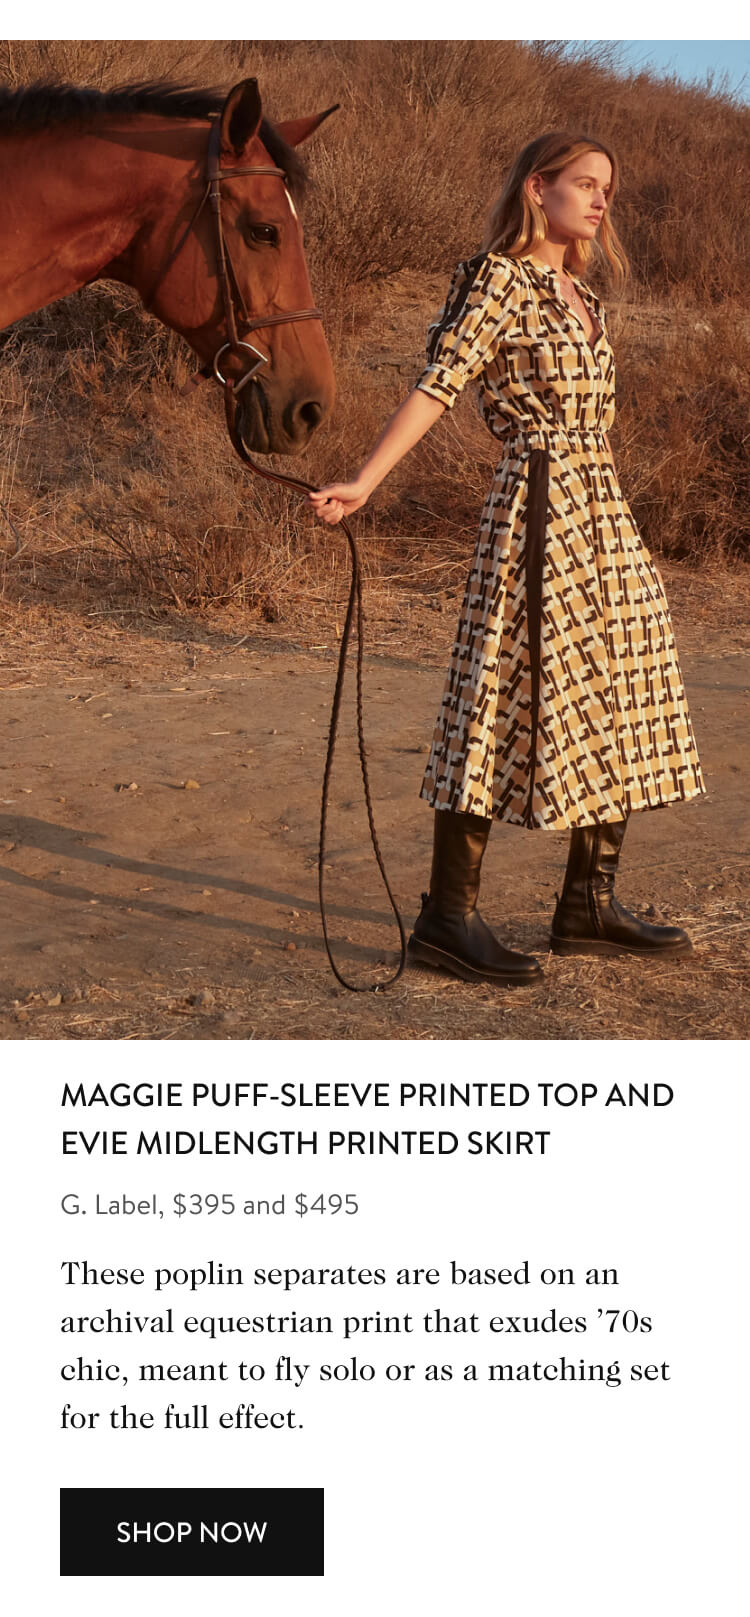 MAGGIE PUFF-SLEEVE PRINTED TOP AND EVIE MIDLENGTH PRINTED SKIRT G. Label, $395 and $495